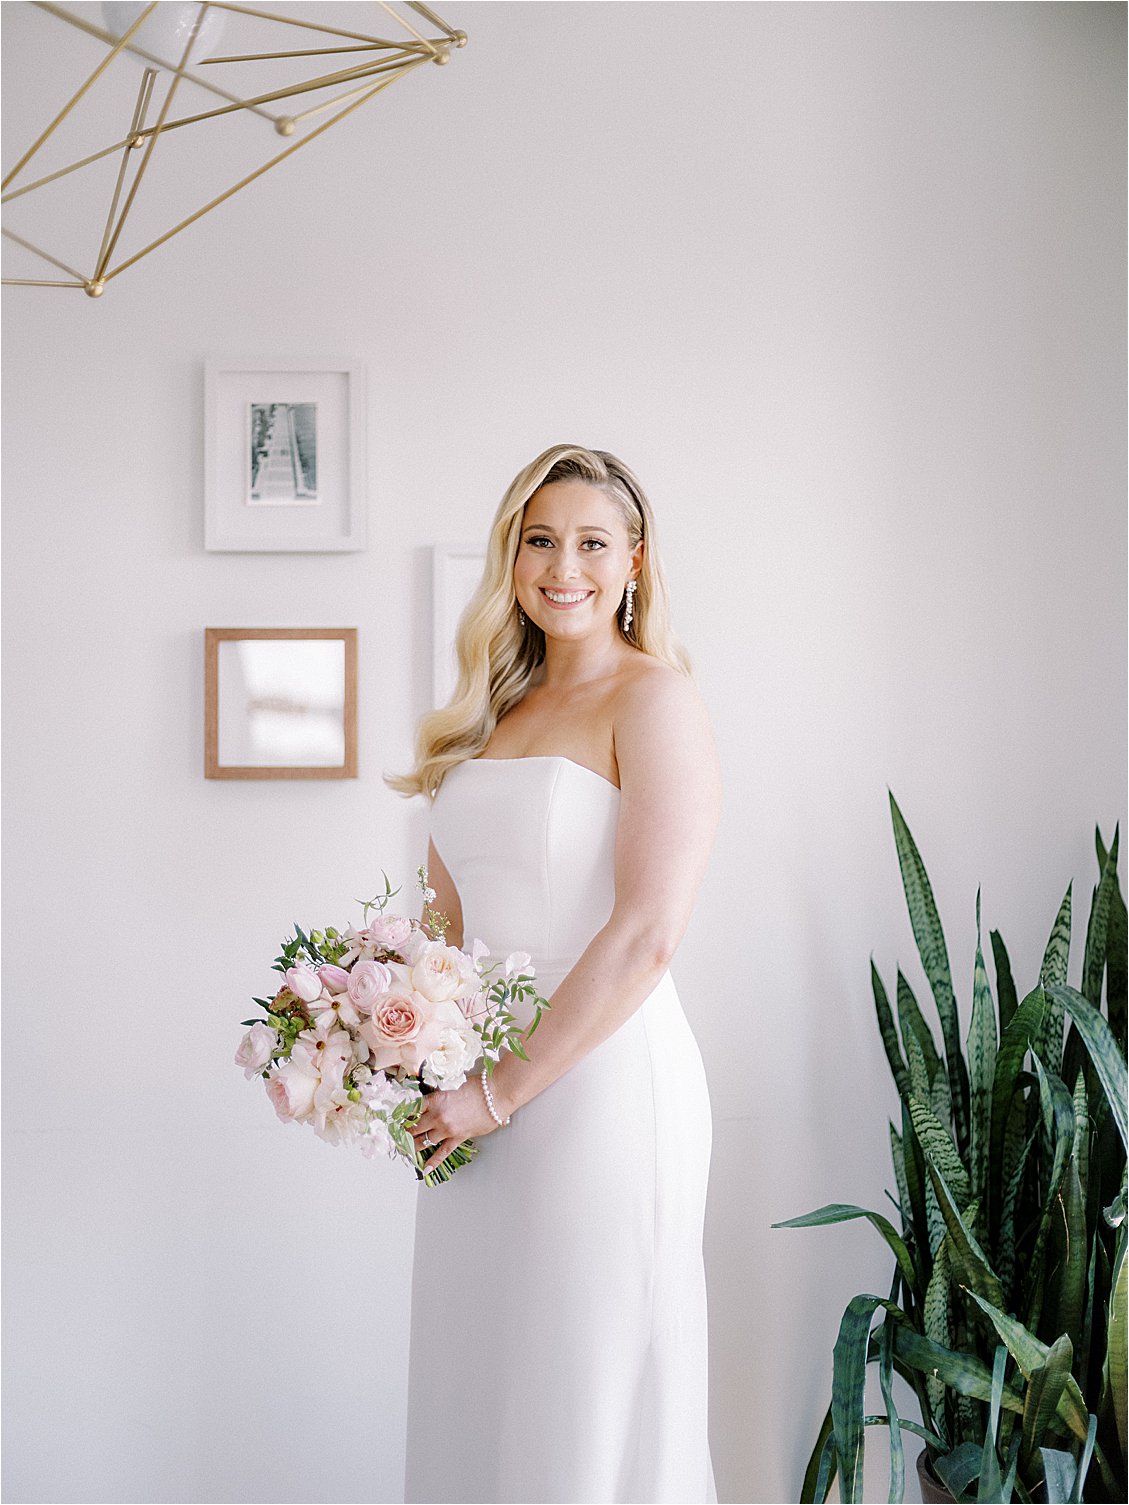 Bride in a modern strapless chic wedding gown with soft hollywood waves and a pink bouquet